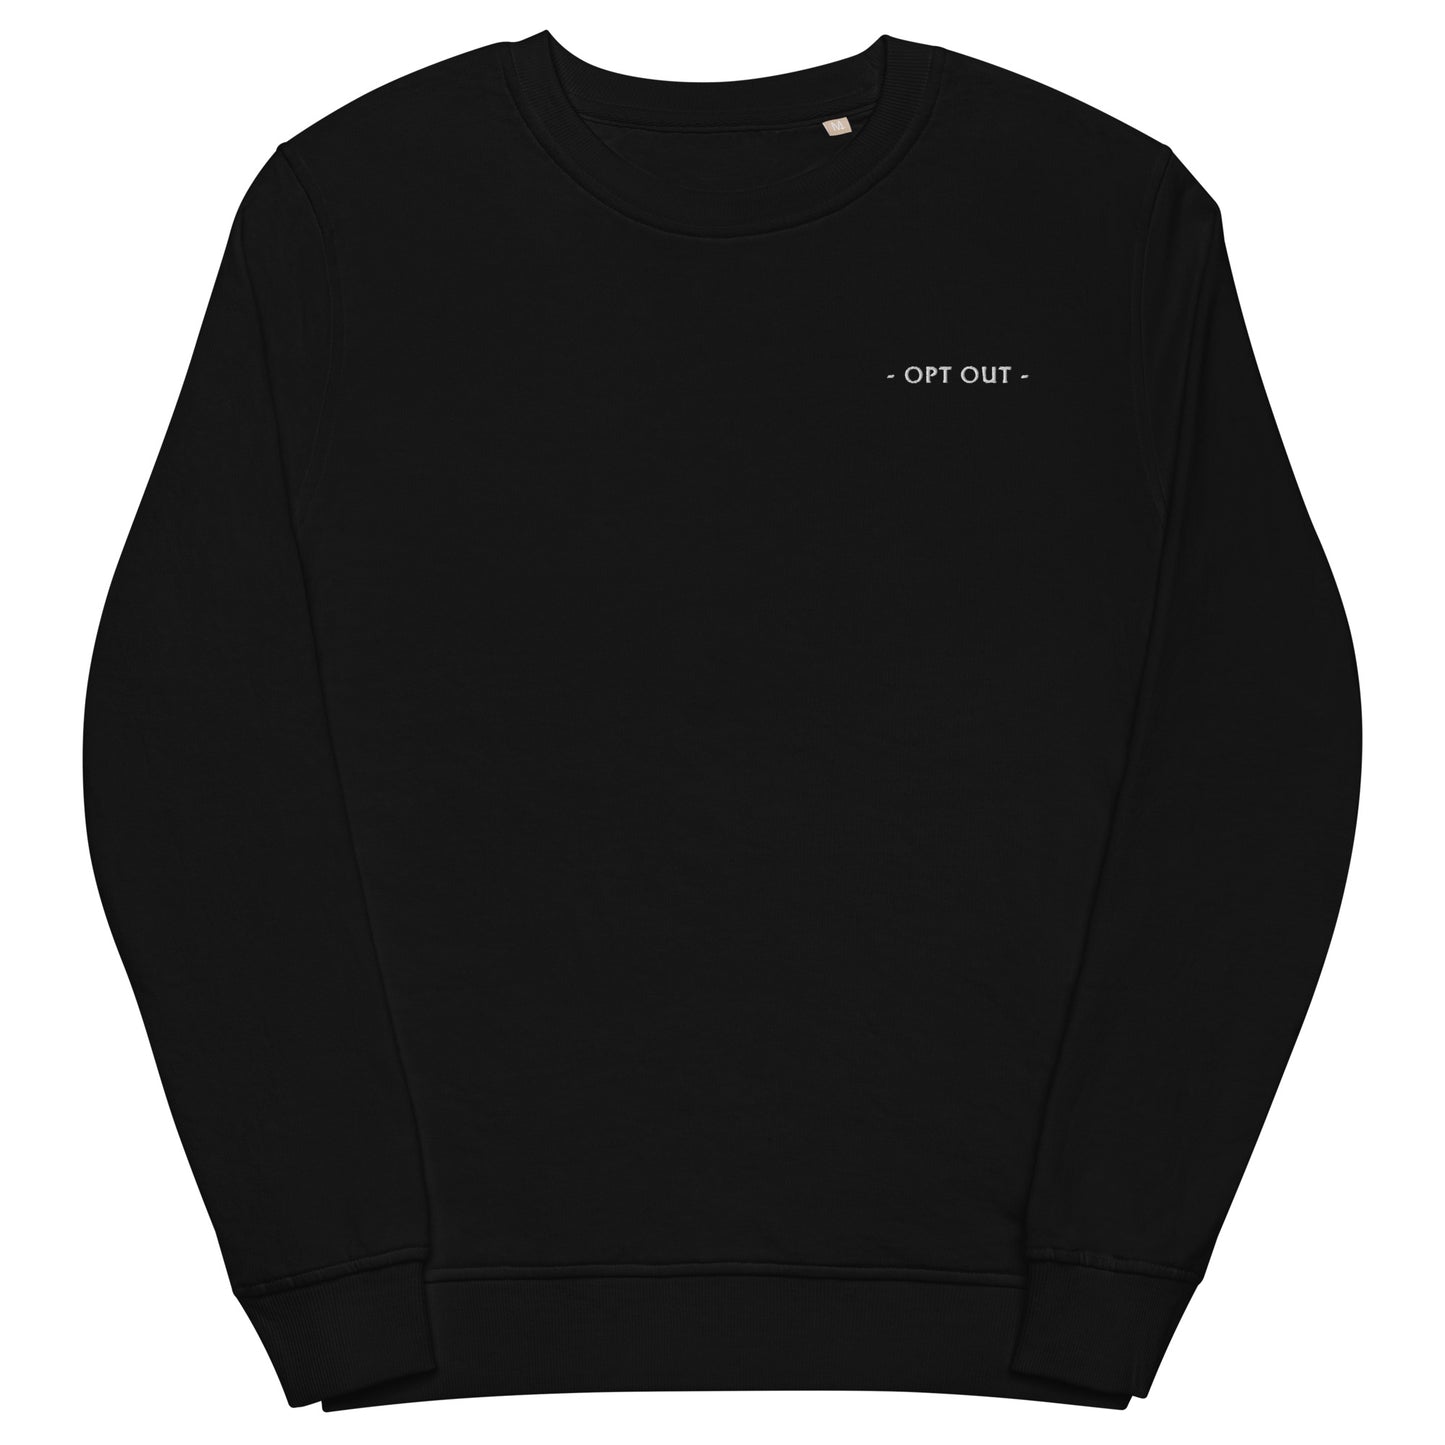 Opt Out - Another Sleepless Night Sweatshirt